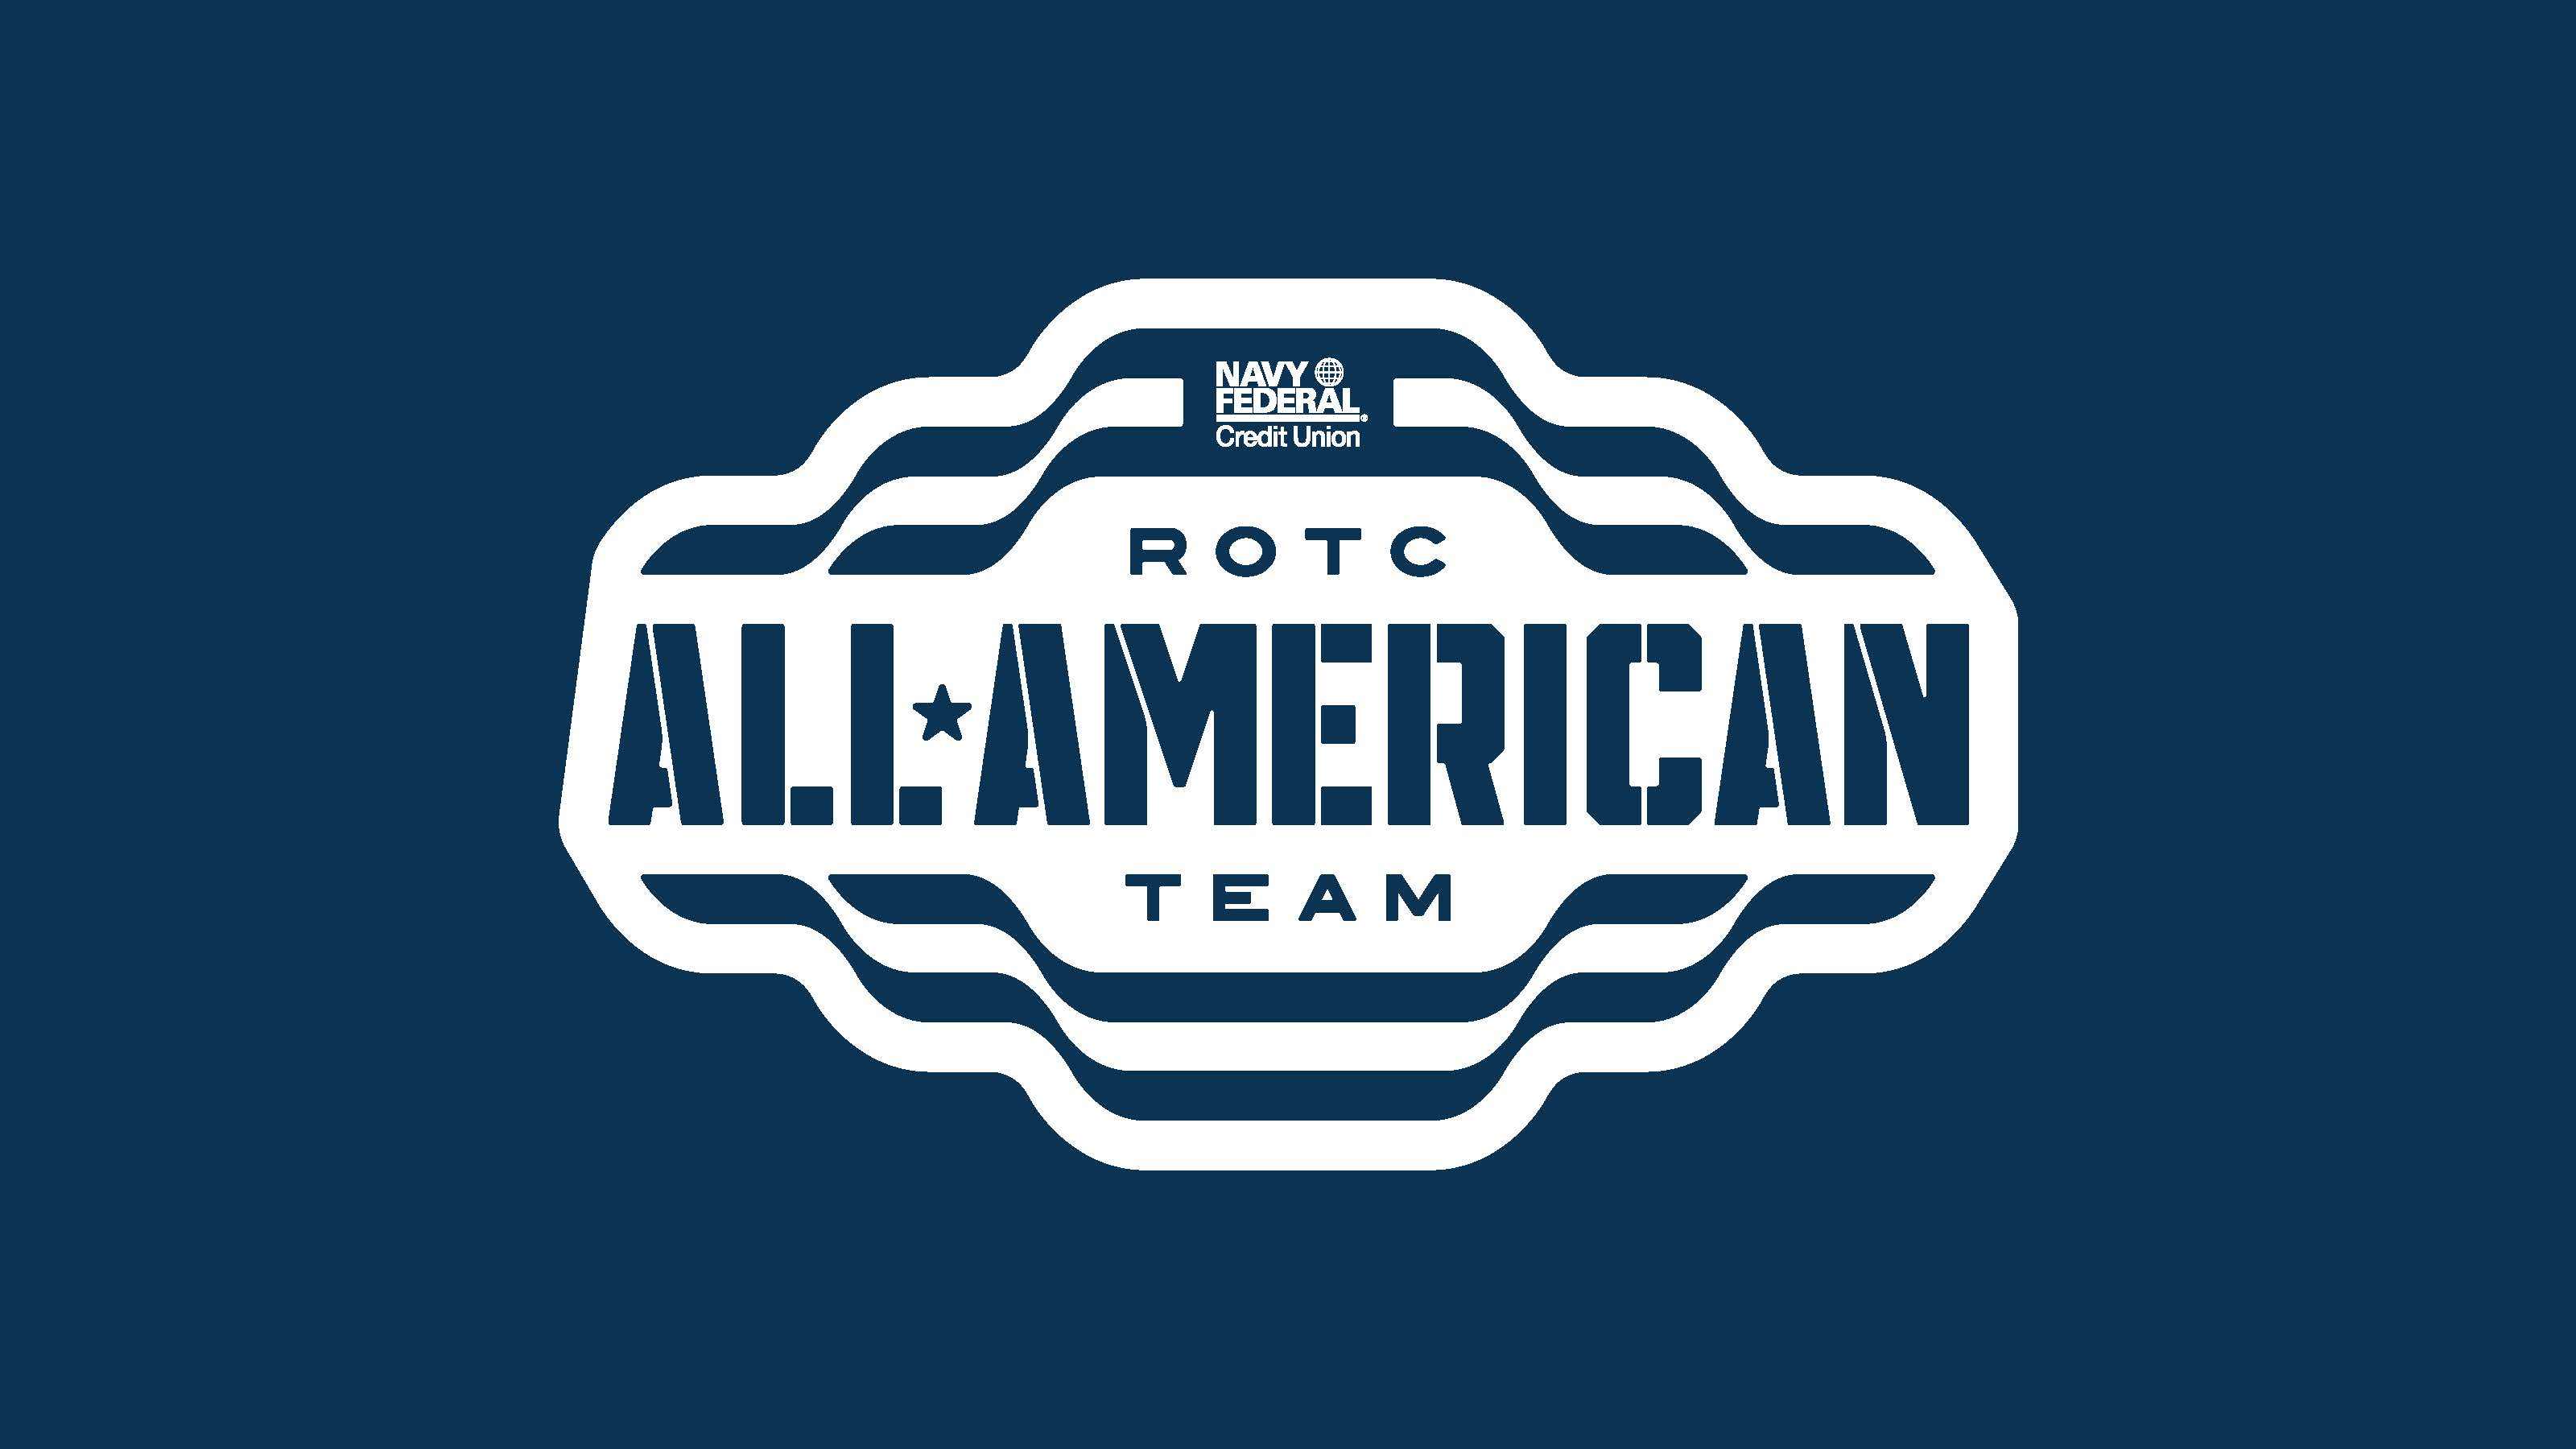 Nfcu Logo - Navy Federal Announces ROTC All-American Team Scholarship As Part of ...